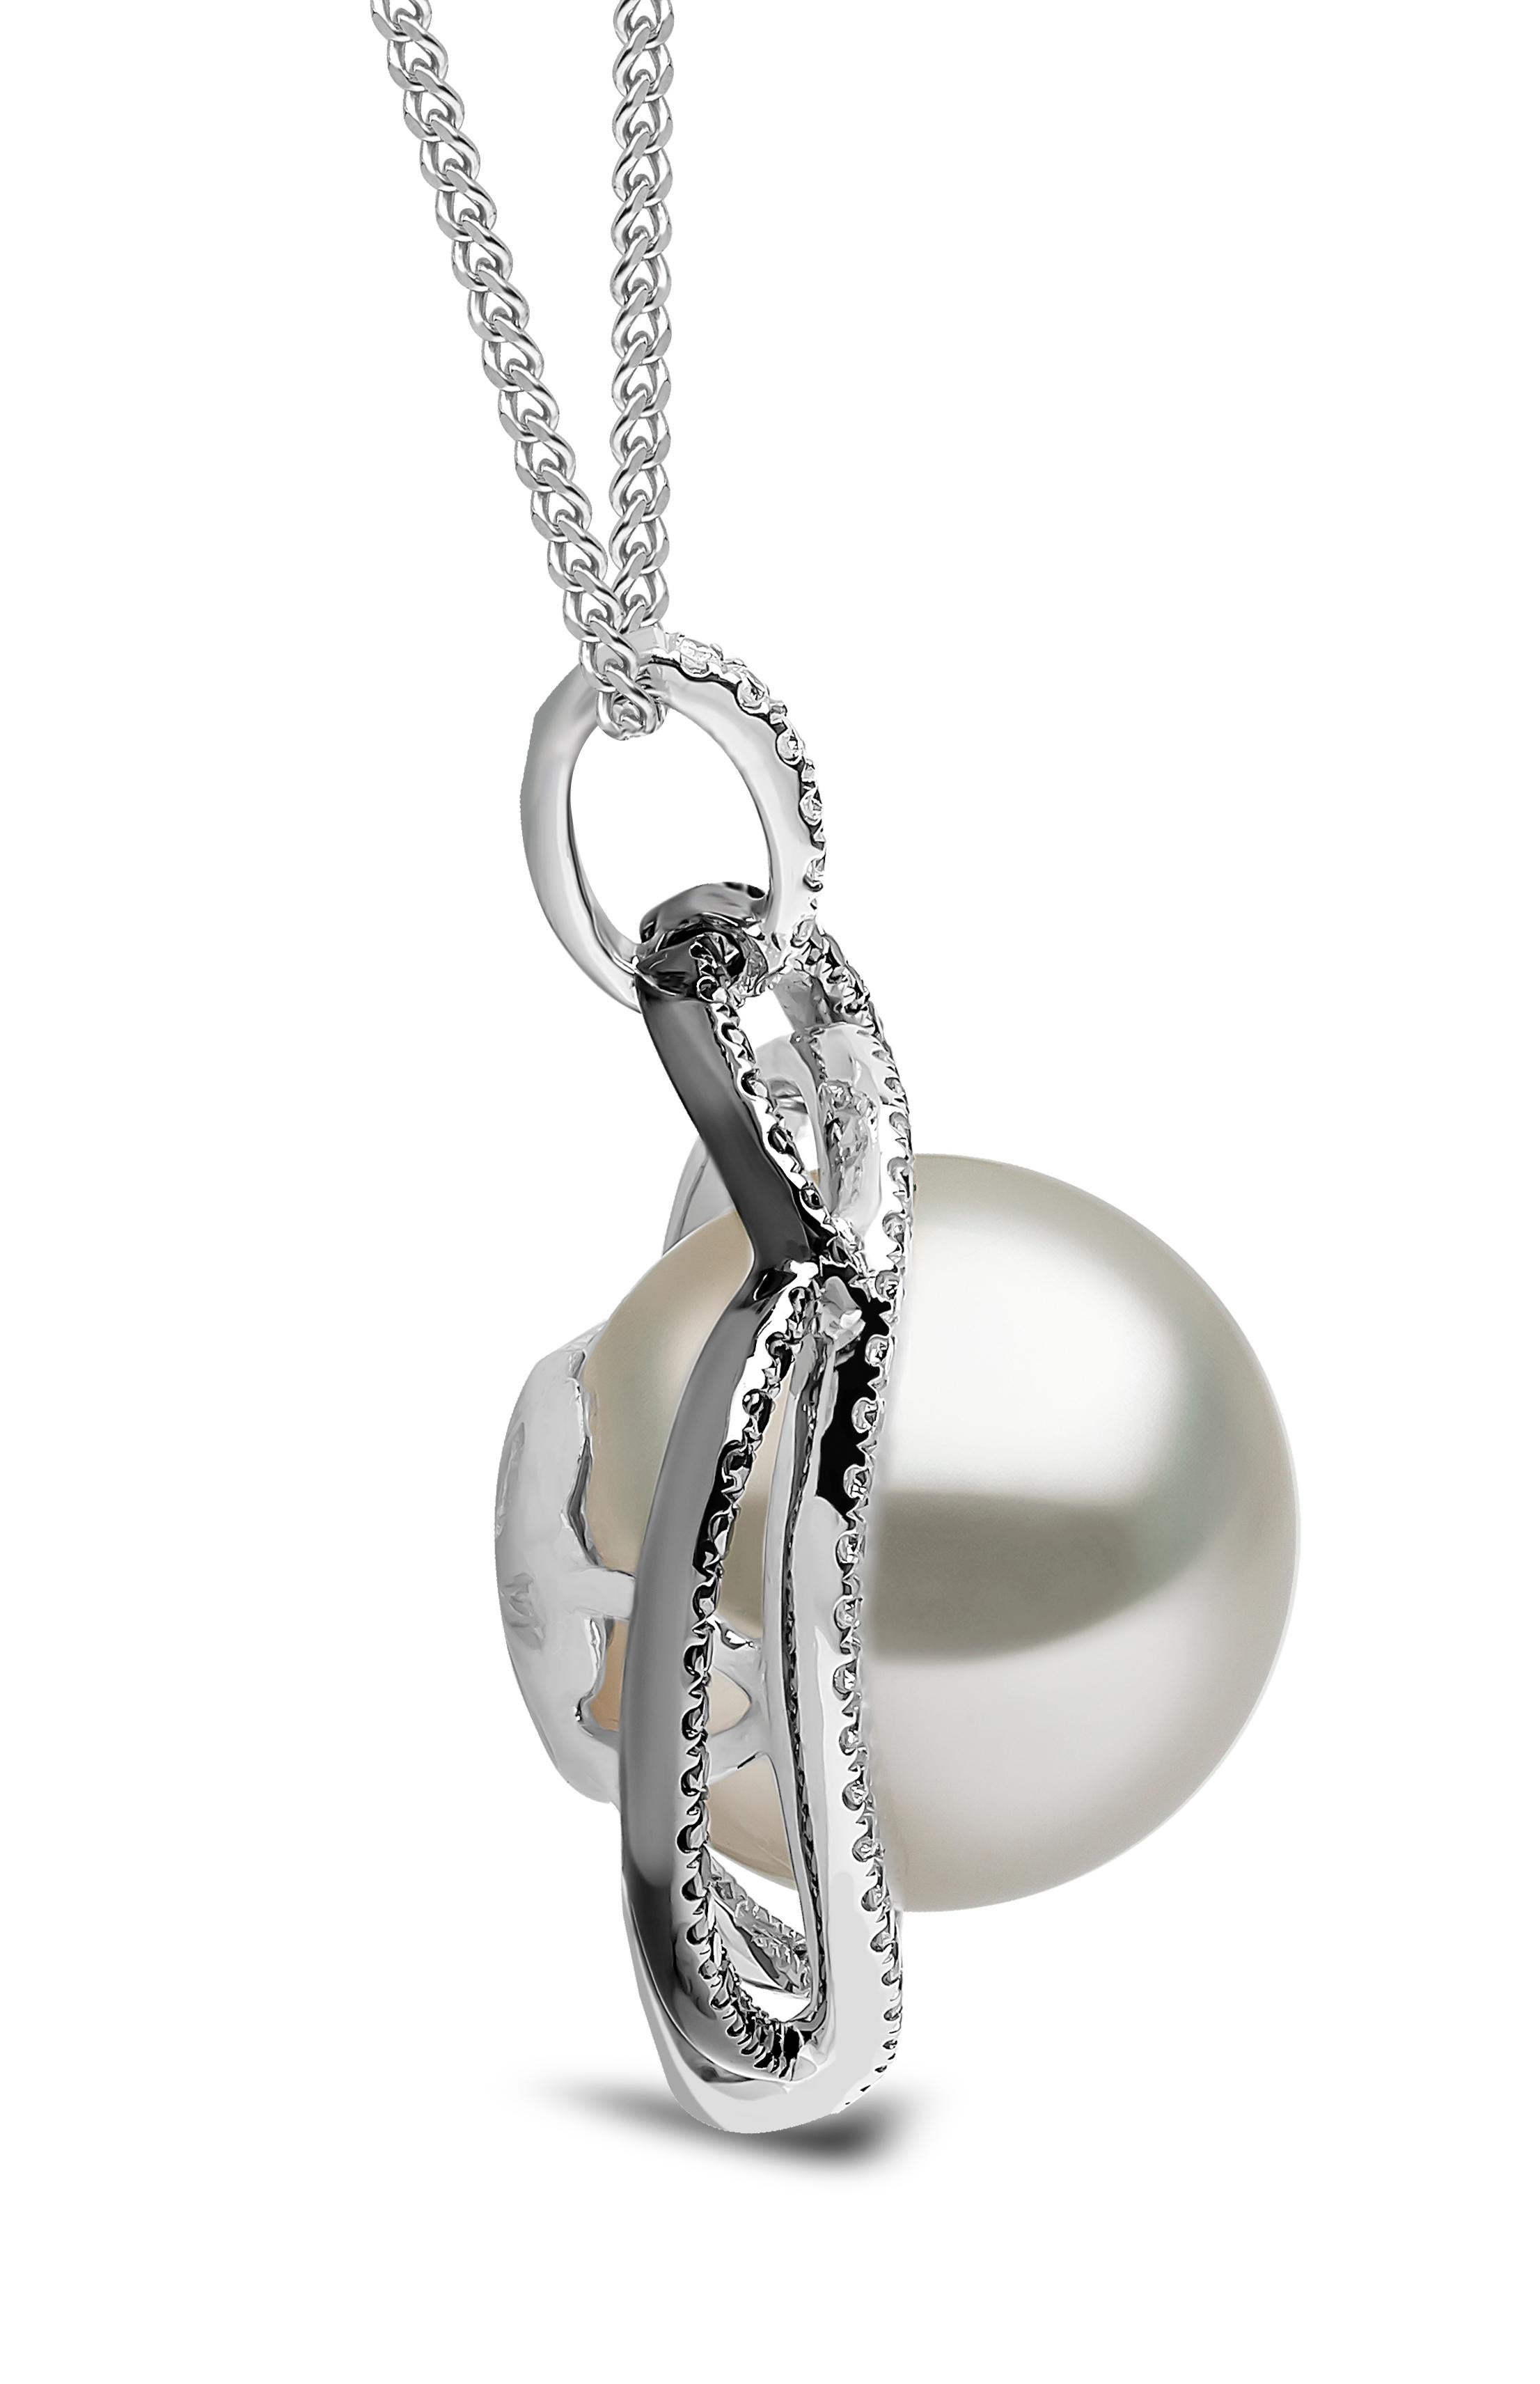 This unique pendant by Yoko London features a lustrous South Sea pearl set amongst a combination of black and white diamonds. The diamonds intertwine to create two abstract hearts. A romantic, but striking piece, this beautiful pendant will add an